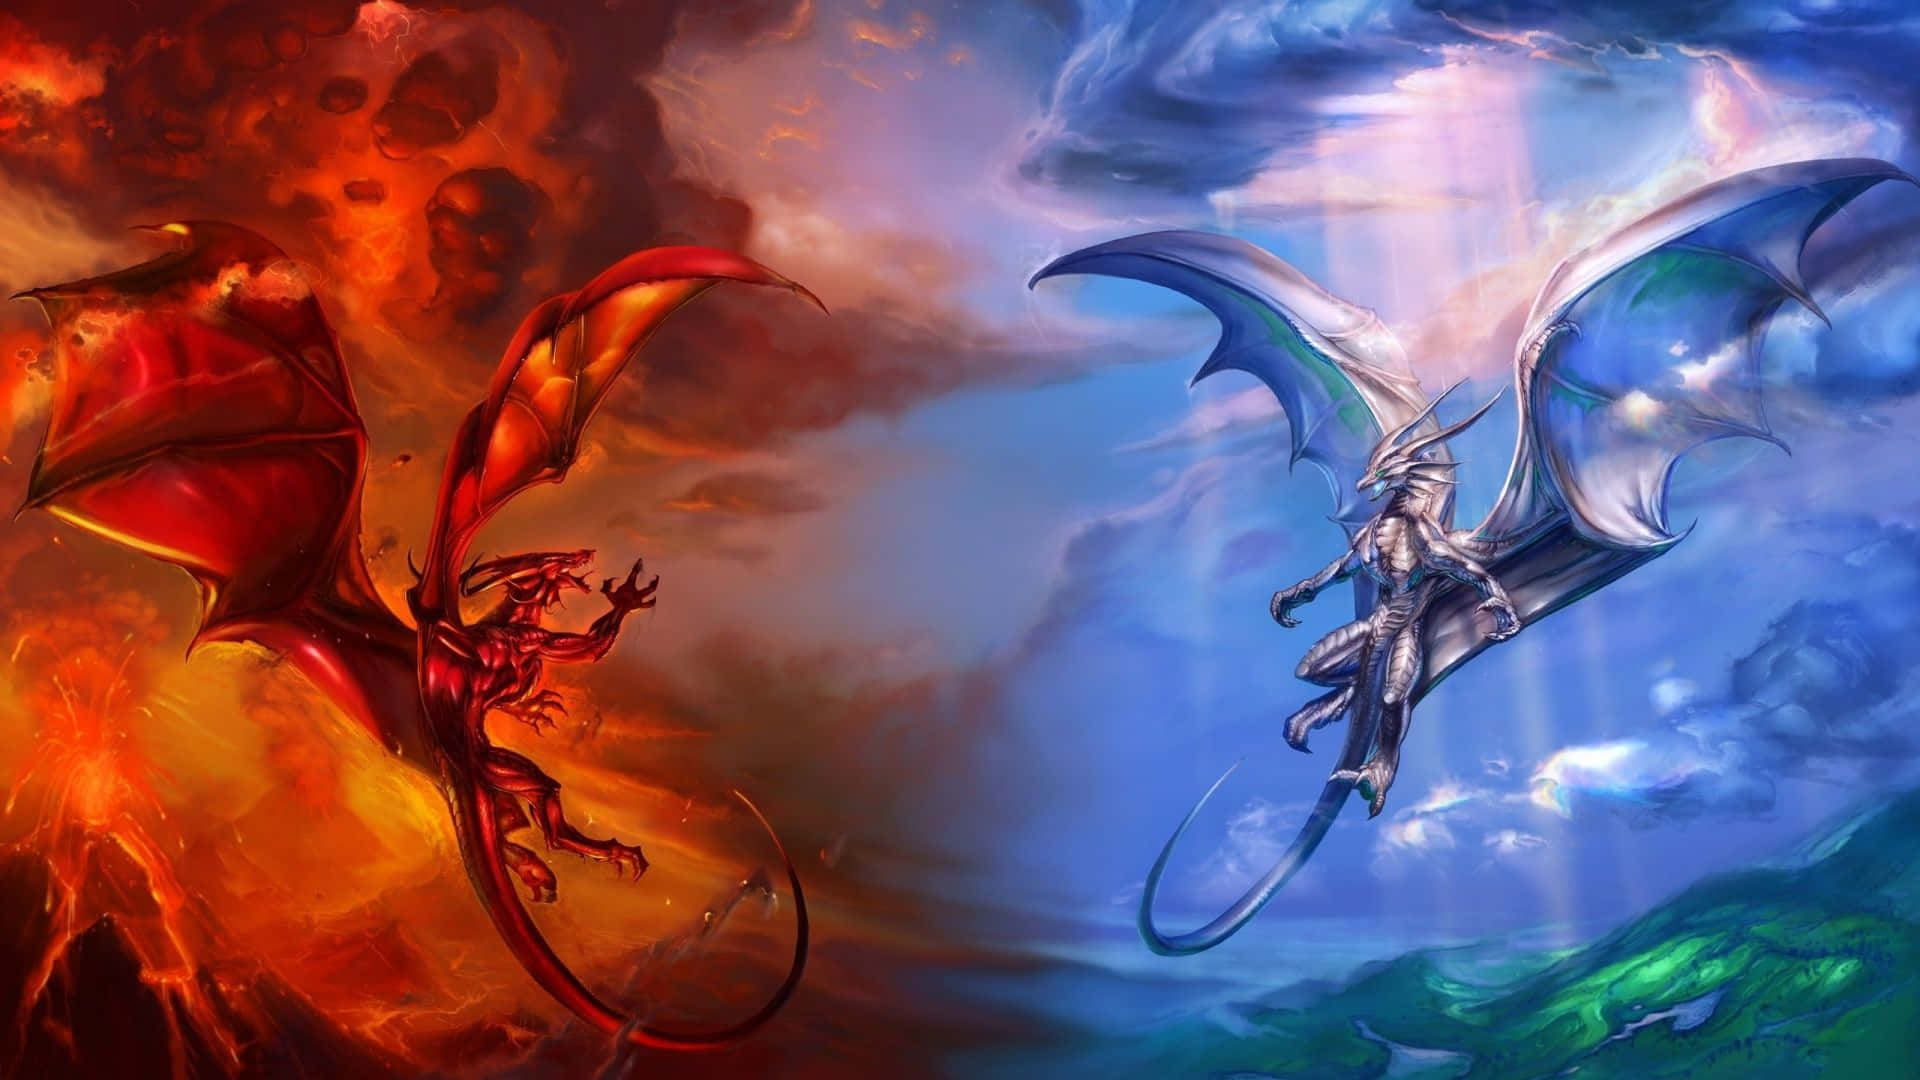 Download 1080p Fire And Ice Dragon Wallpaper 